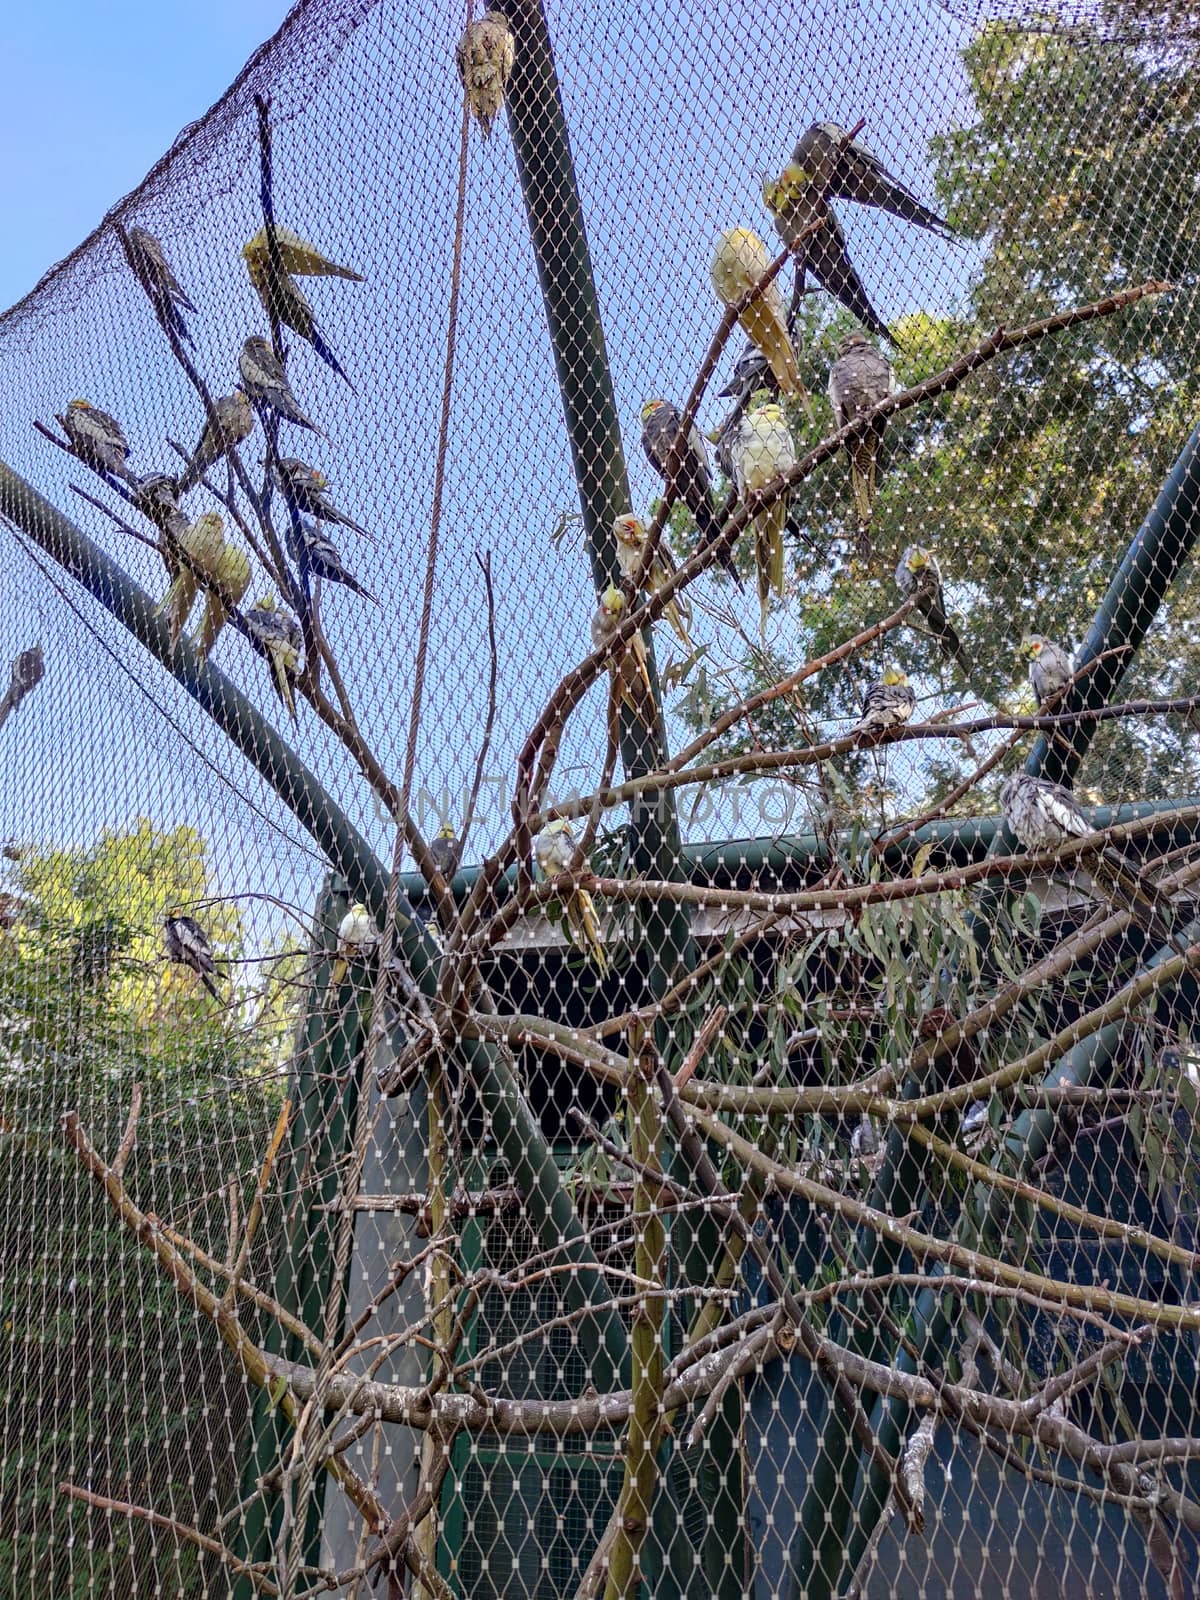 a group of wonderful birds sitting in their cage